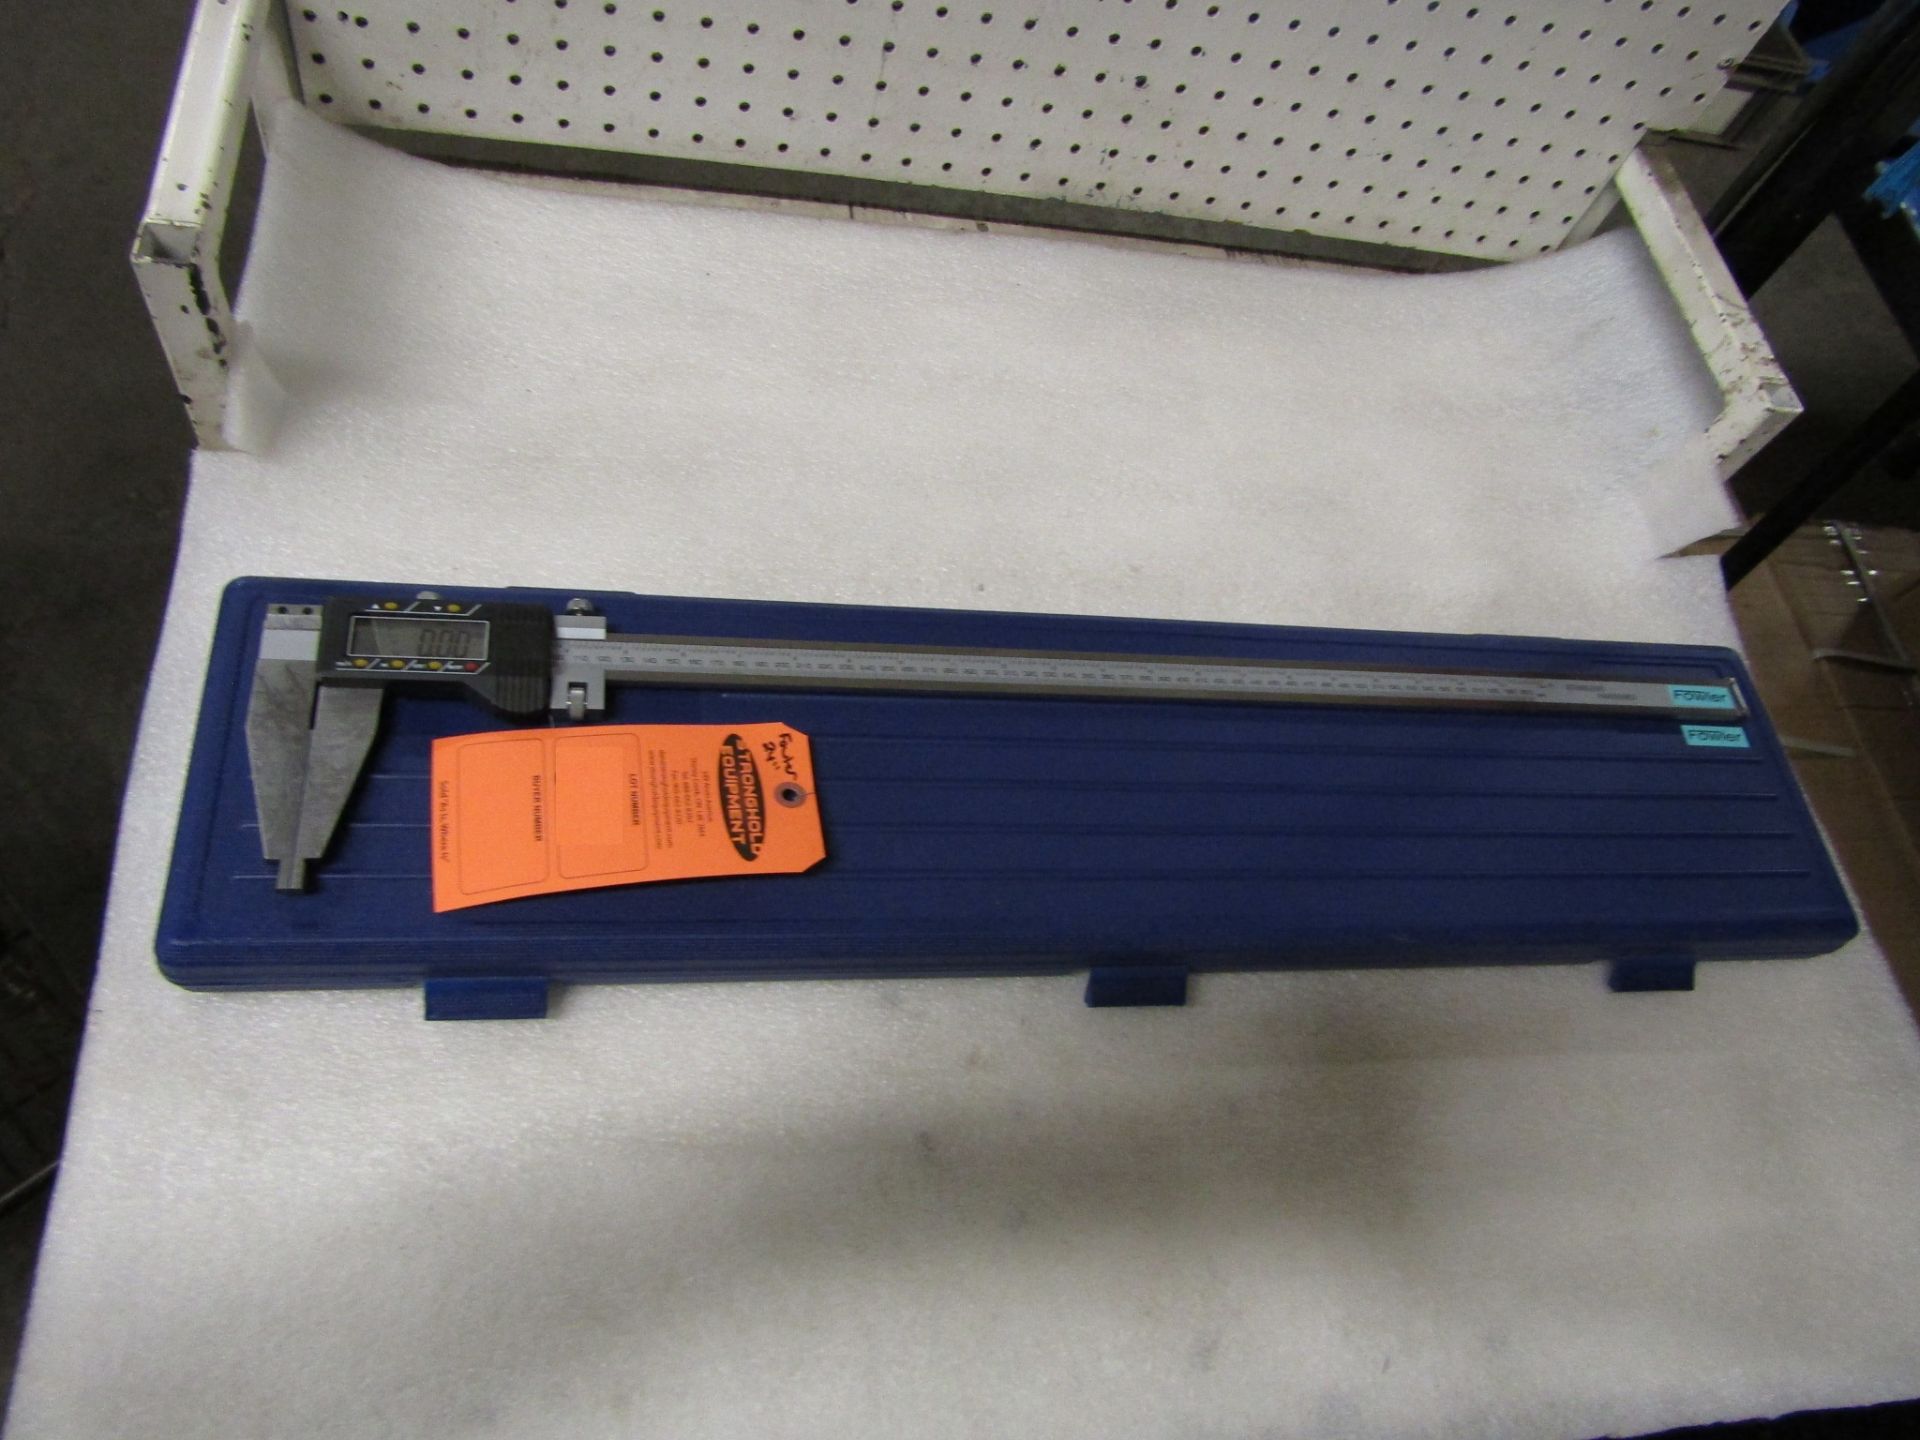 BRAND NEW Fowler 24" / 600mm Digital Caliper - large digital readout display in case - MINT - Image 2 of 2